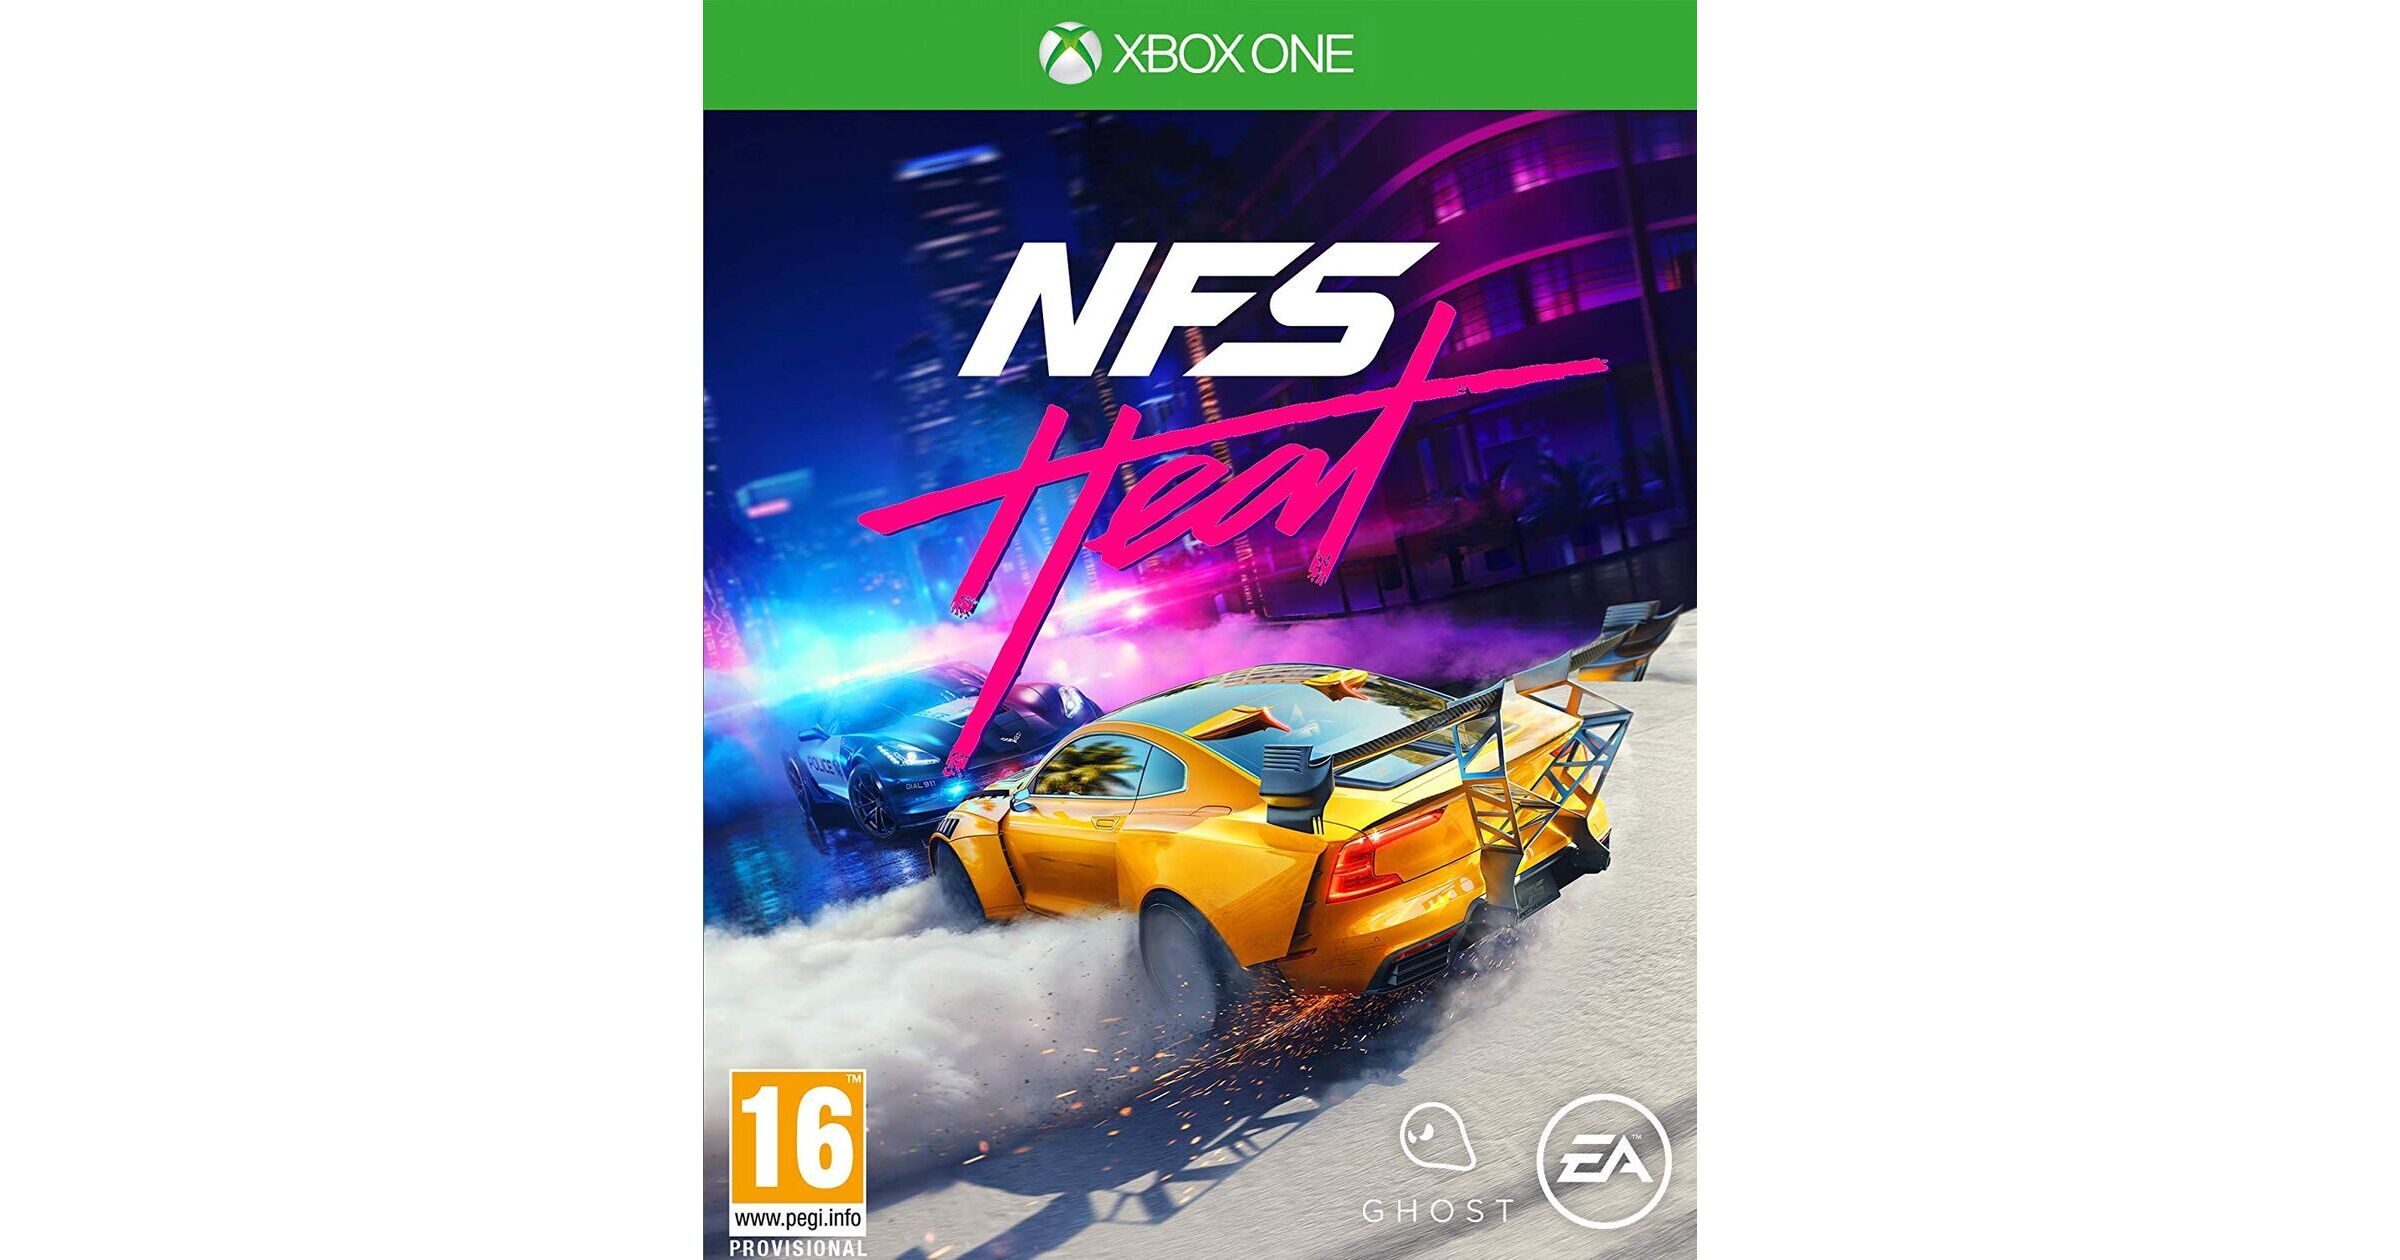 is nfs underground 1 backwards compatible xbox one